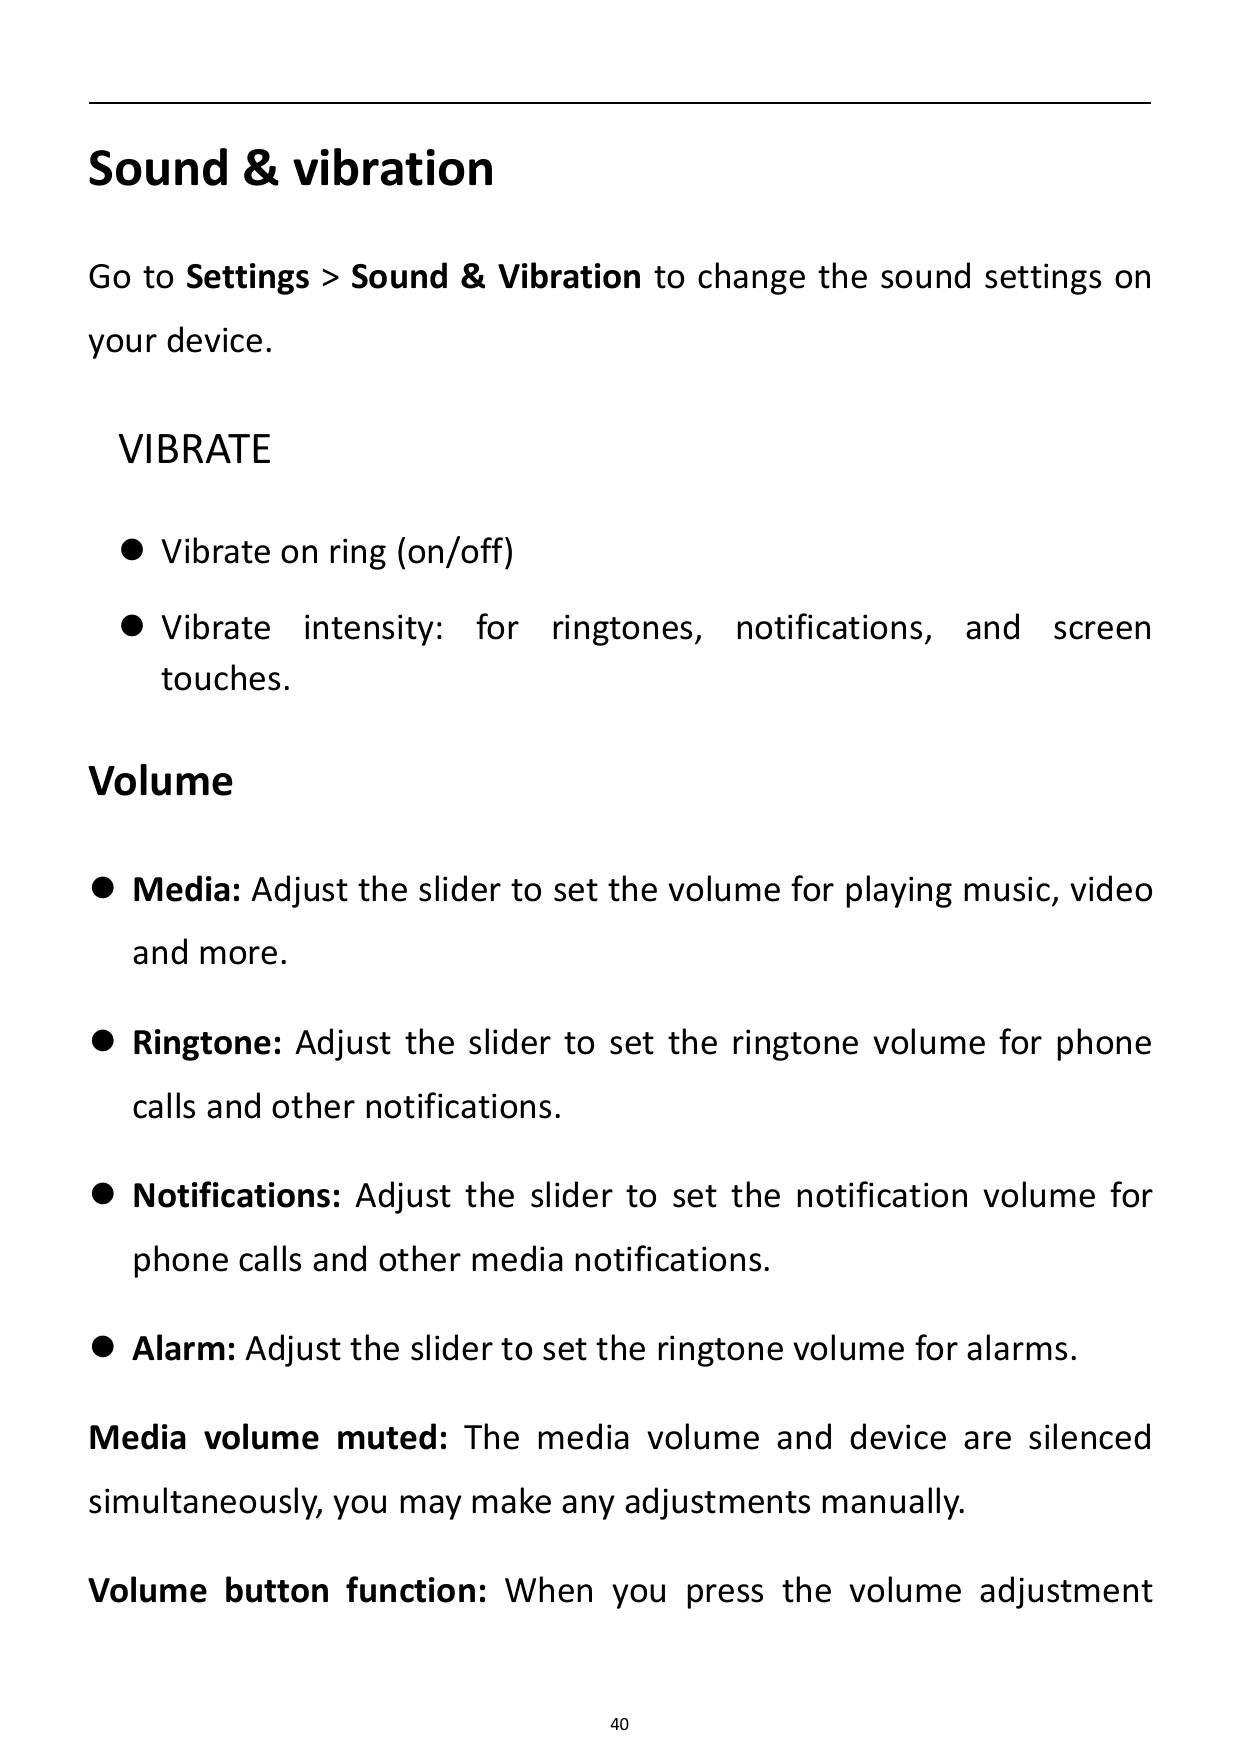 Sound & vibrationGo to Settings > Sound & Vibration to change the sound settings onyour device.VIBRATE Vibrate on ring (on/off)